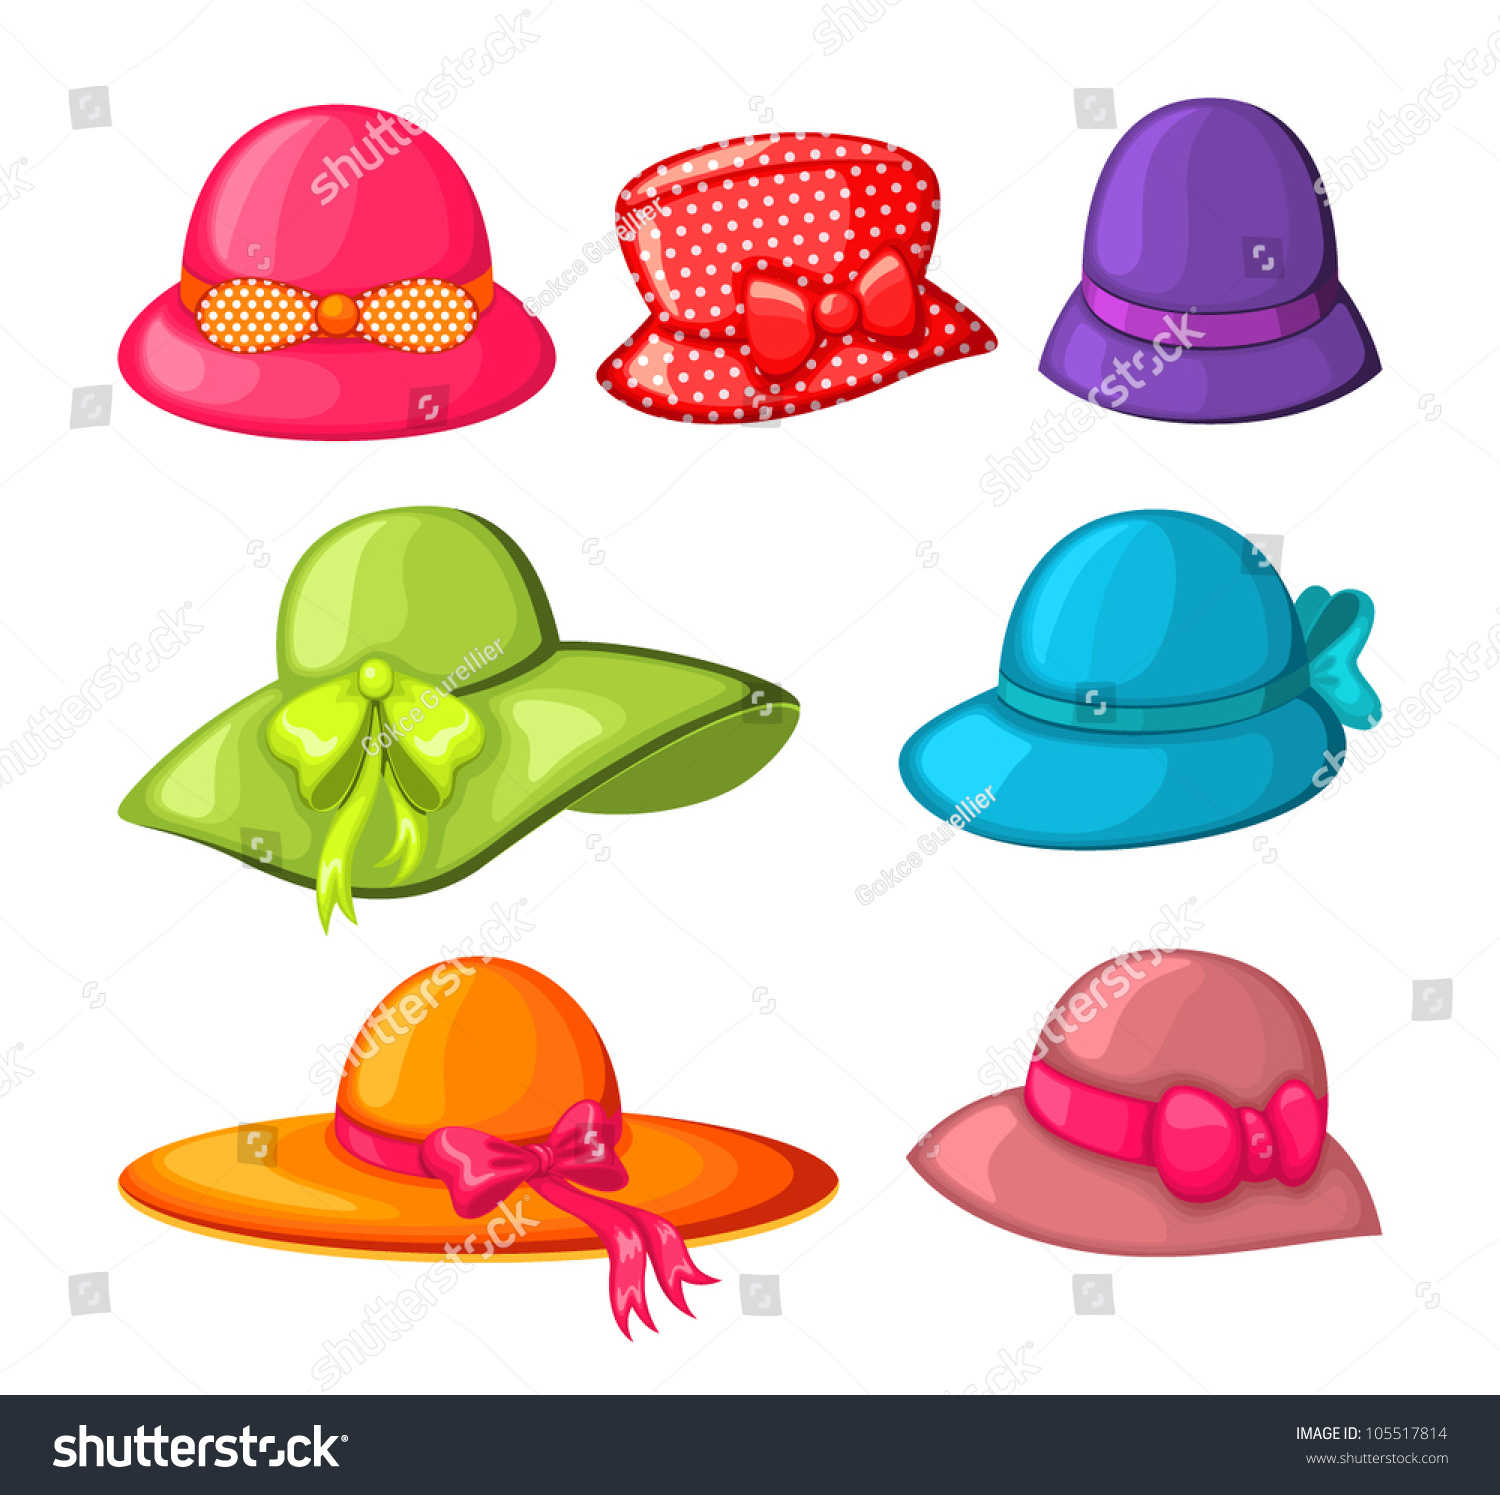 Collection Woman Hats Stock Vector 105517814 - Shutterstock